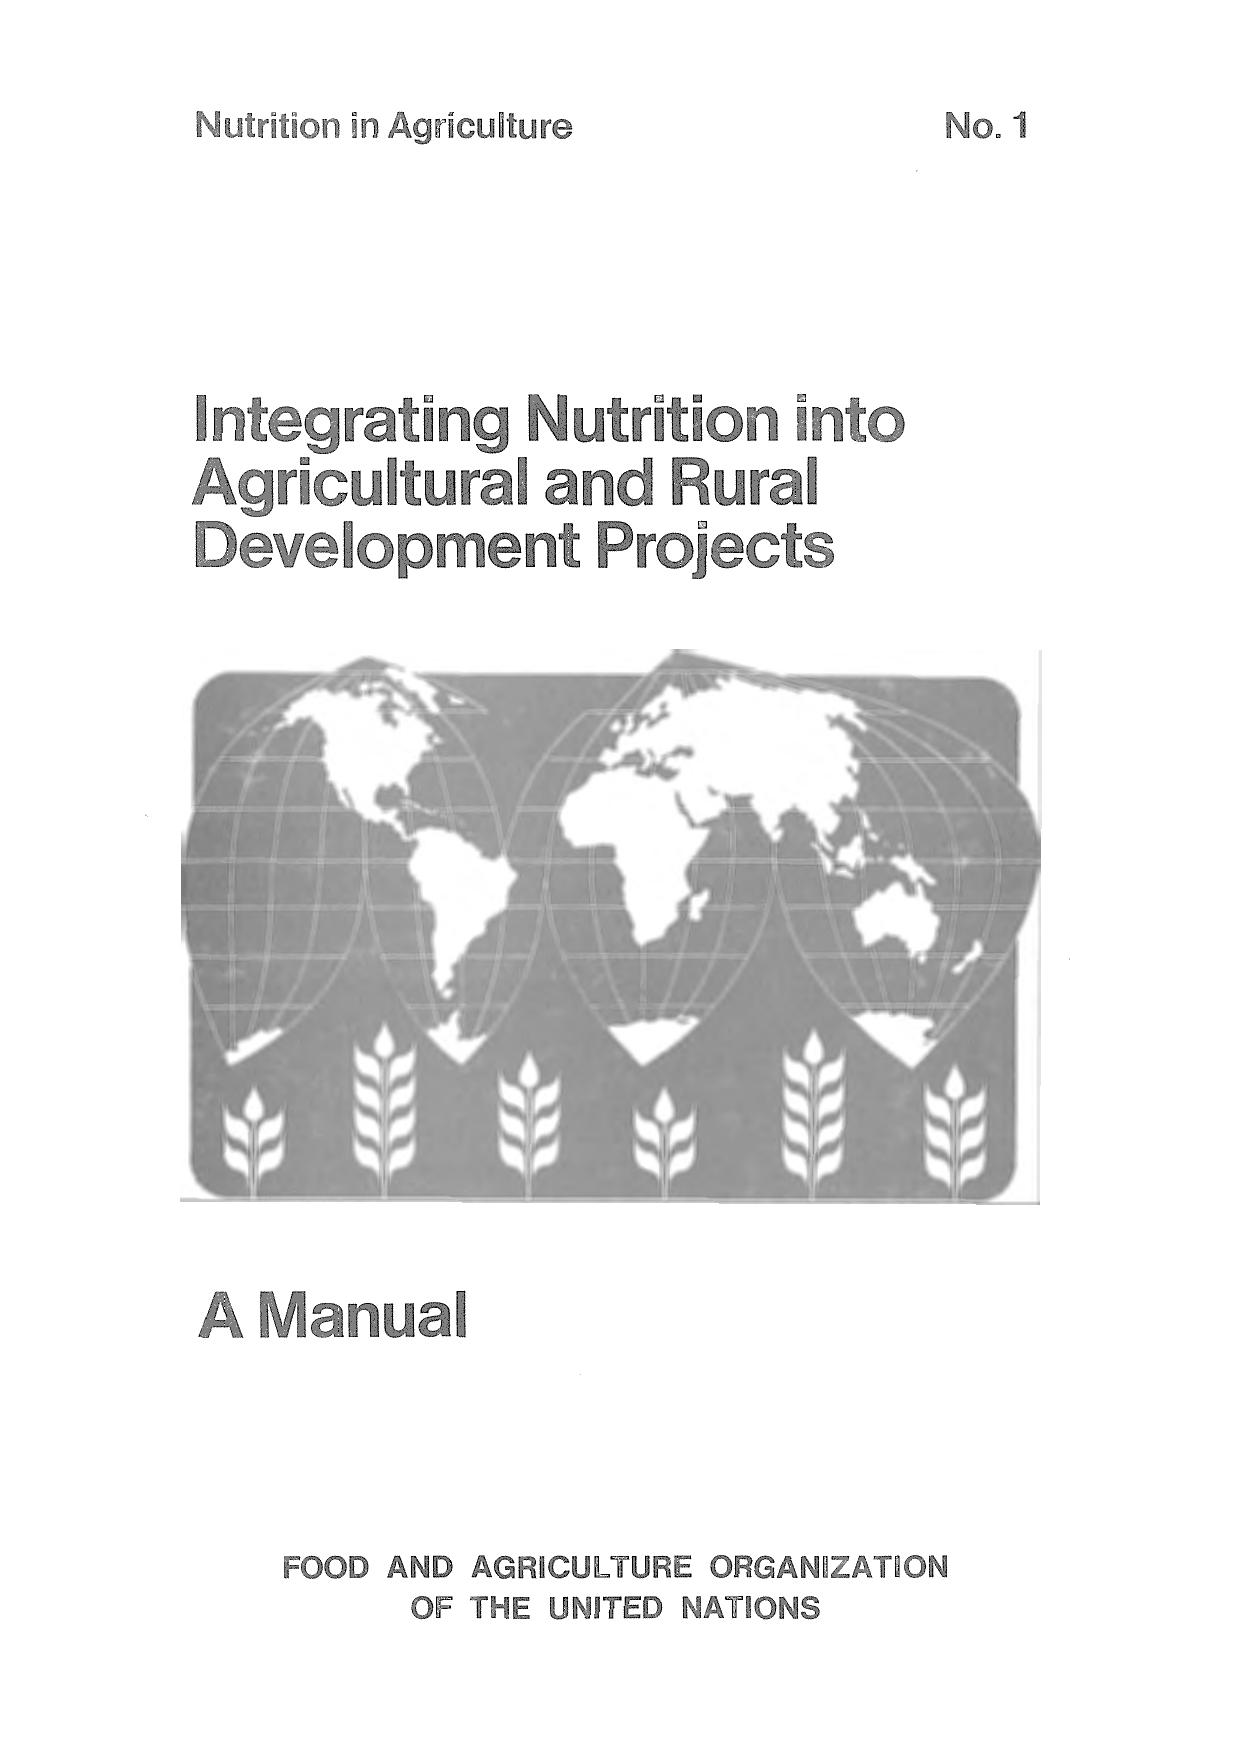 INTEGRATING NUTRITION INTO AGRICULTURAL AND RURAL DEVELOPMENT PROJECTS - A Manual